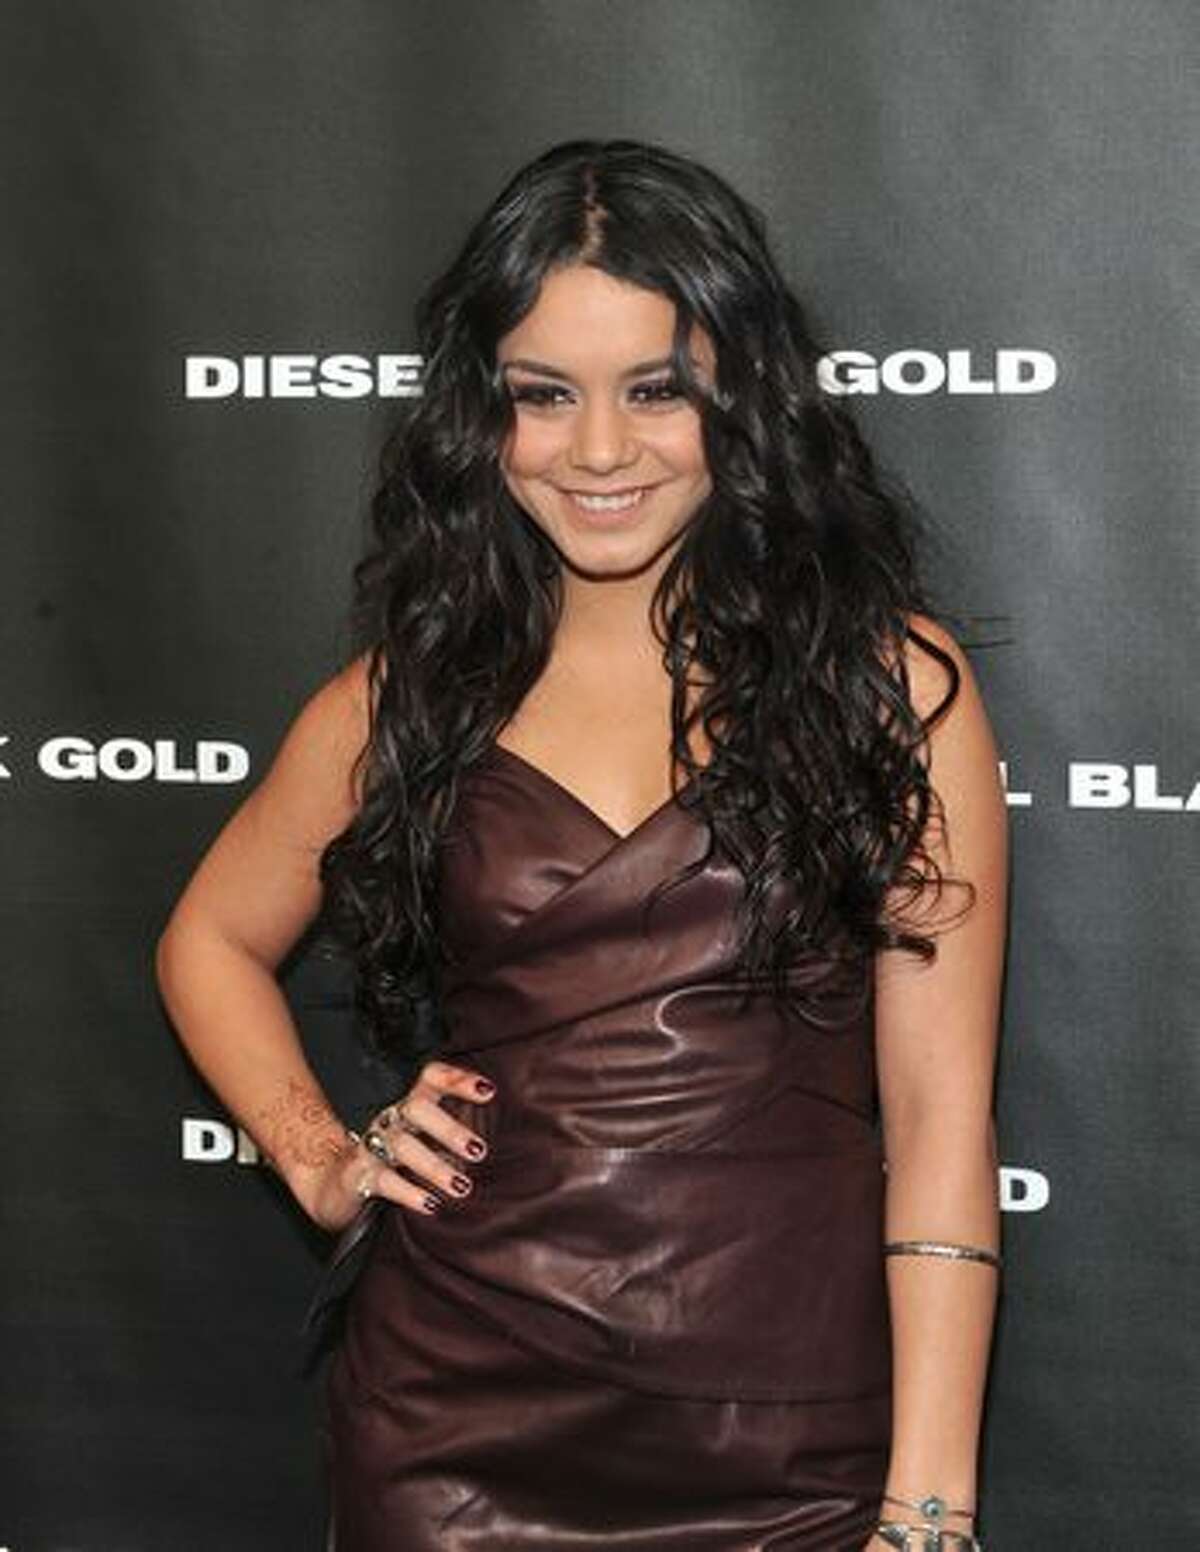 NEW YORK, NY - Actress Vanessa Hudgens poses backstage at the Diesel Black Gold Fall 2011 fashion show during Mercedes-Benz Fashion Week at Pier 94 on Wednesday in New York City. (Photo by Henry S. Dziekan III/Getty Images for IMG)